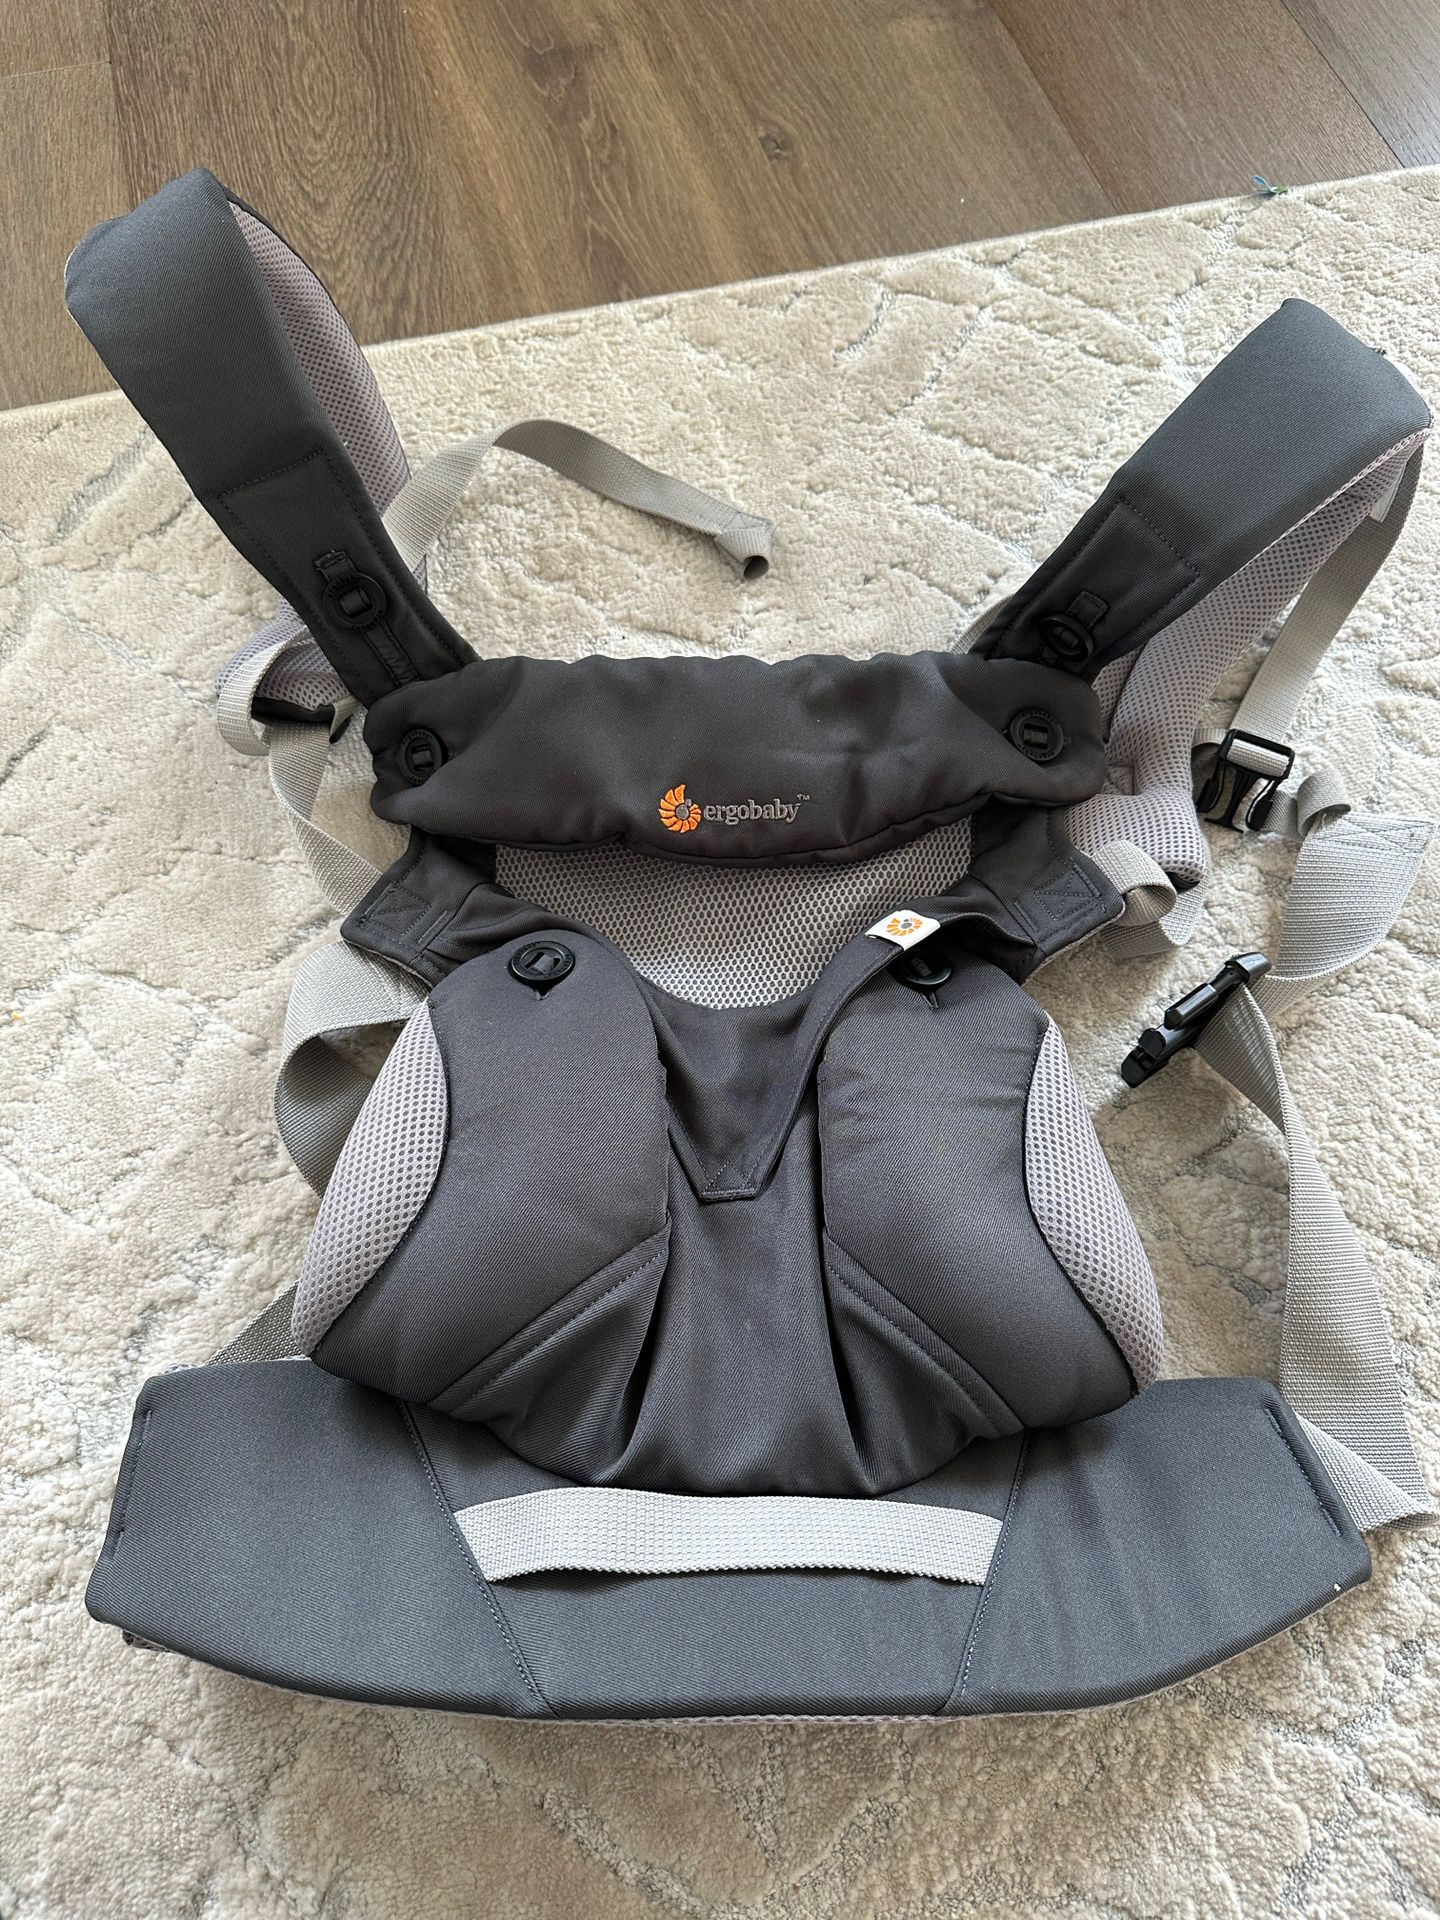 Ergobaby 360 Cool Air Baby Carrier